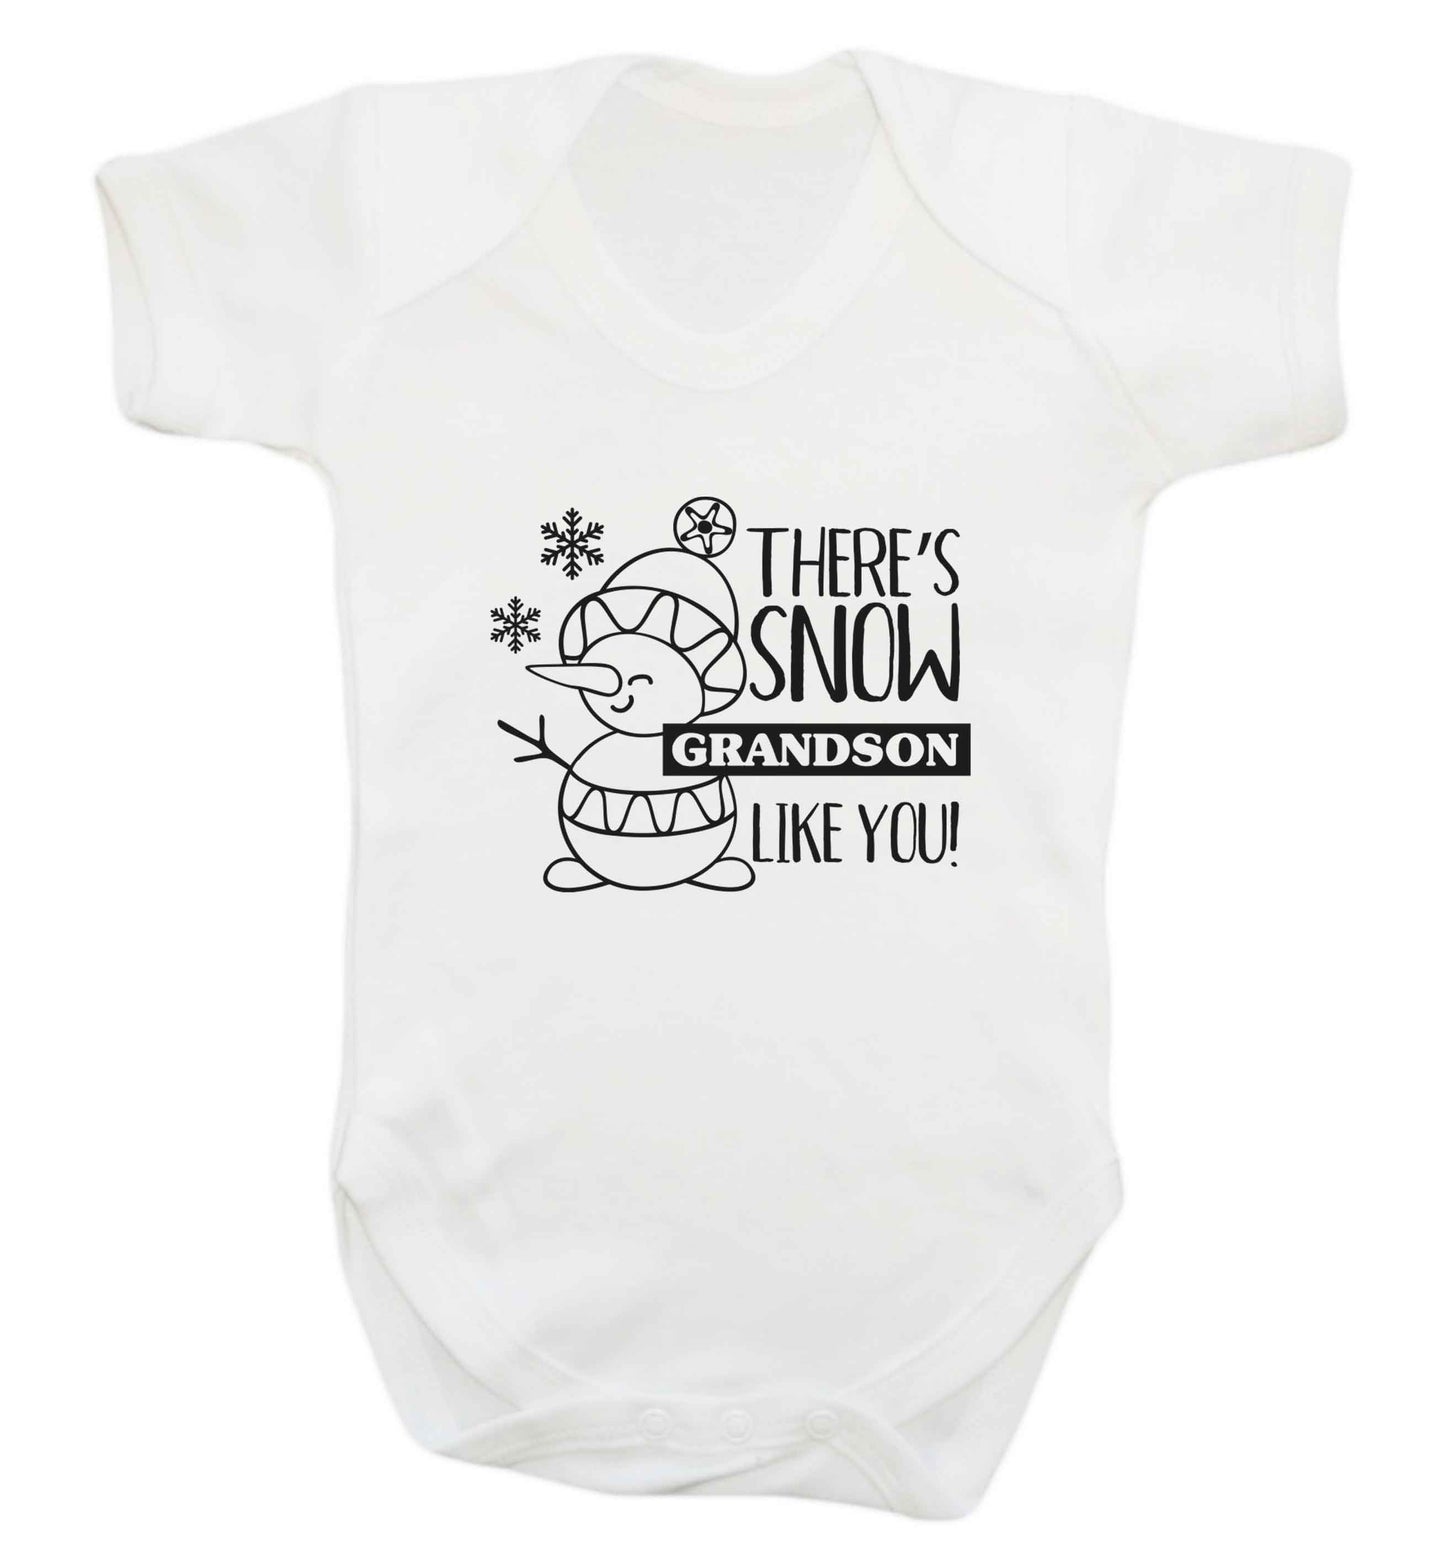 There's snow grandson like you baby vest white 18-24 months